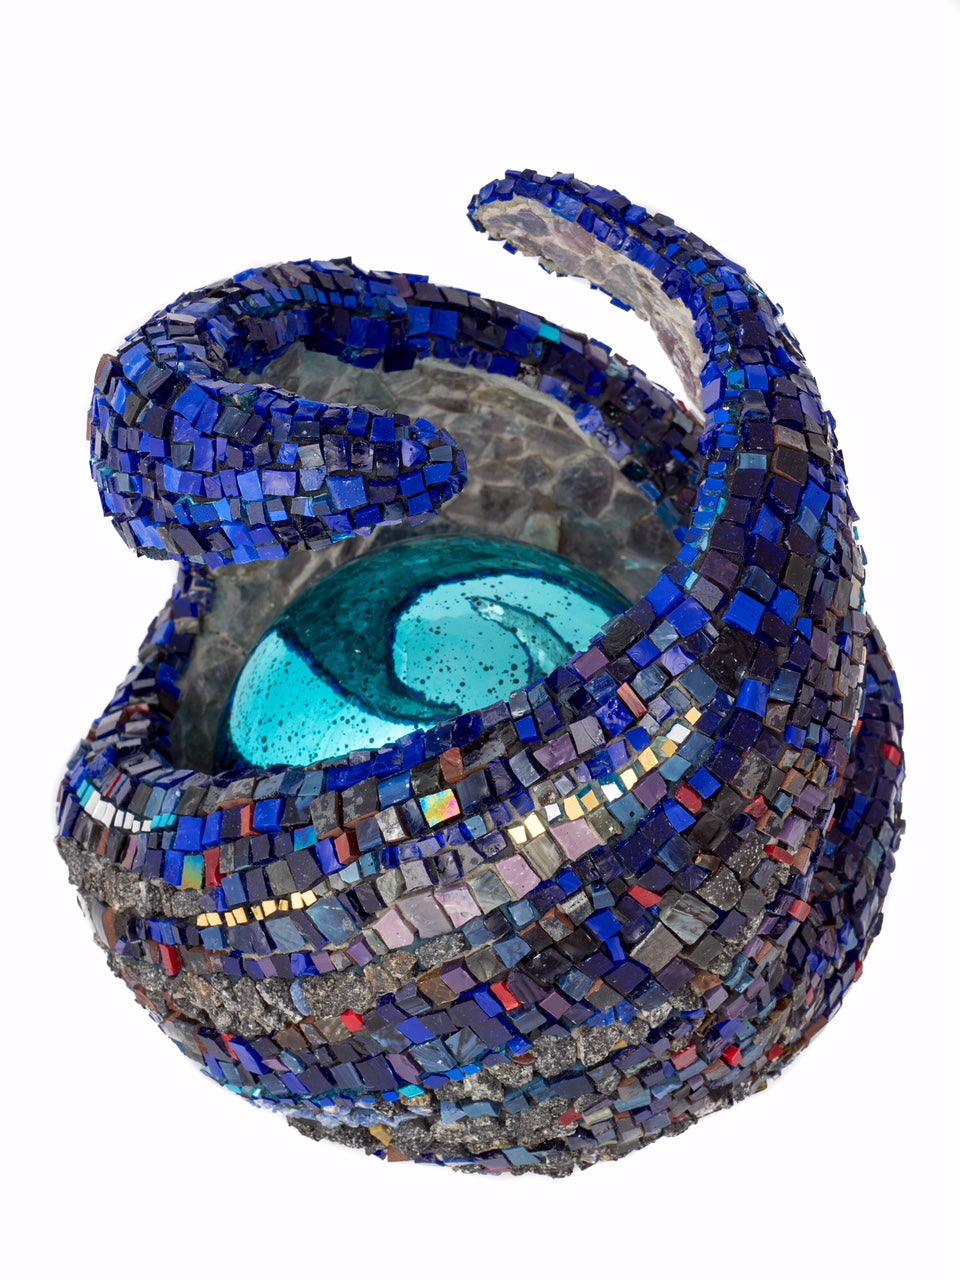 “Embrace” 8” by Dianne Sonnenberg - sculptural mosaic.  Smalti, granite, semiprecious stone, 24K gold, and an illuminated glass sphere create this very personal piece exploring the preciousness and fragility of an embrace.